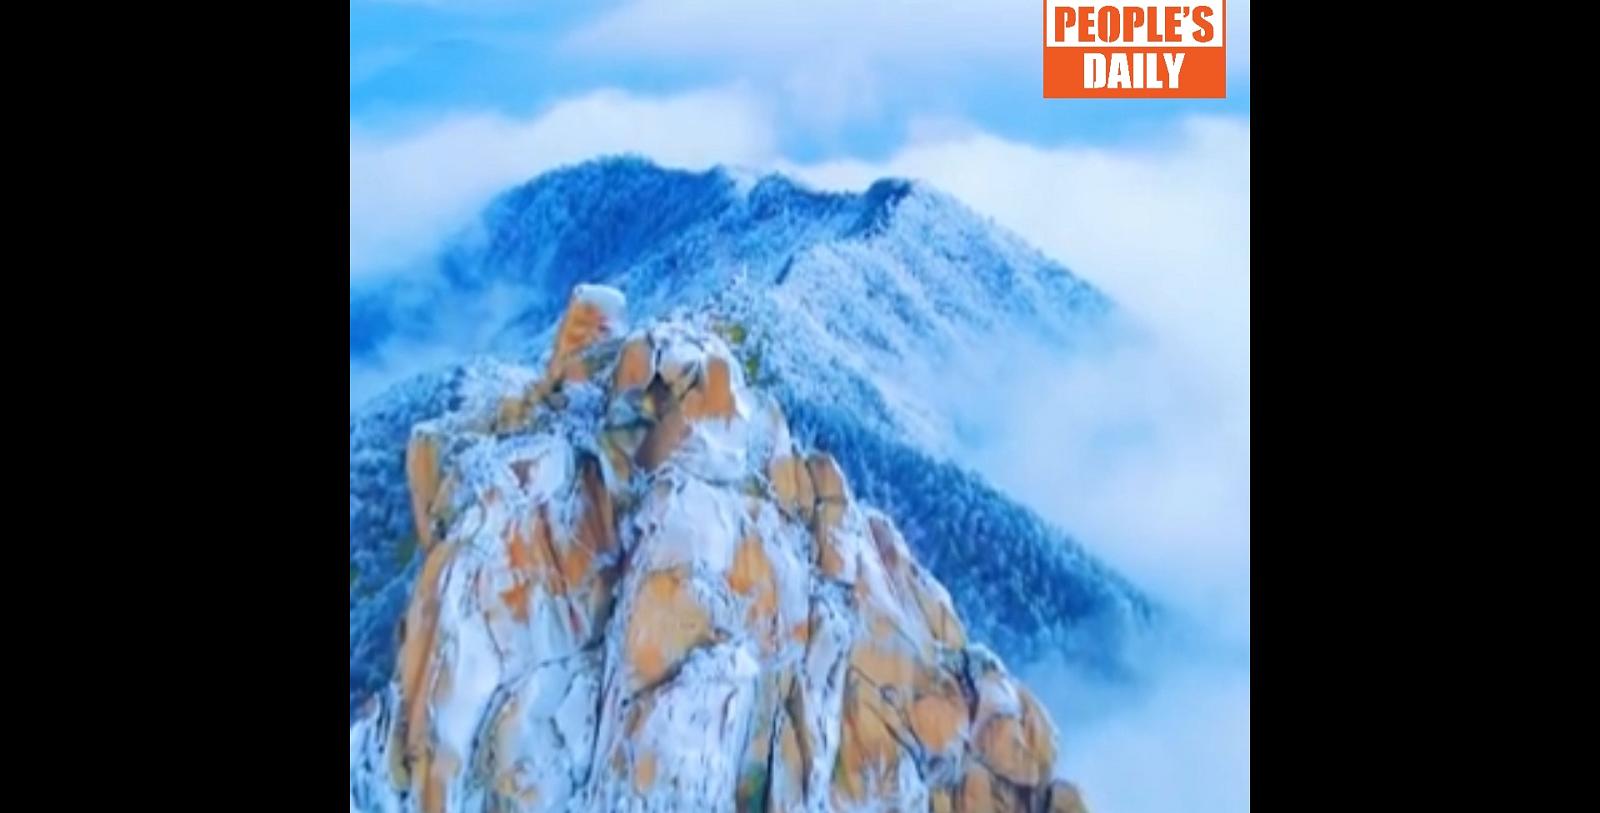 Tianzhu Mountain turns into picture after first snow